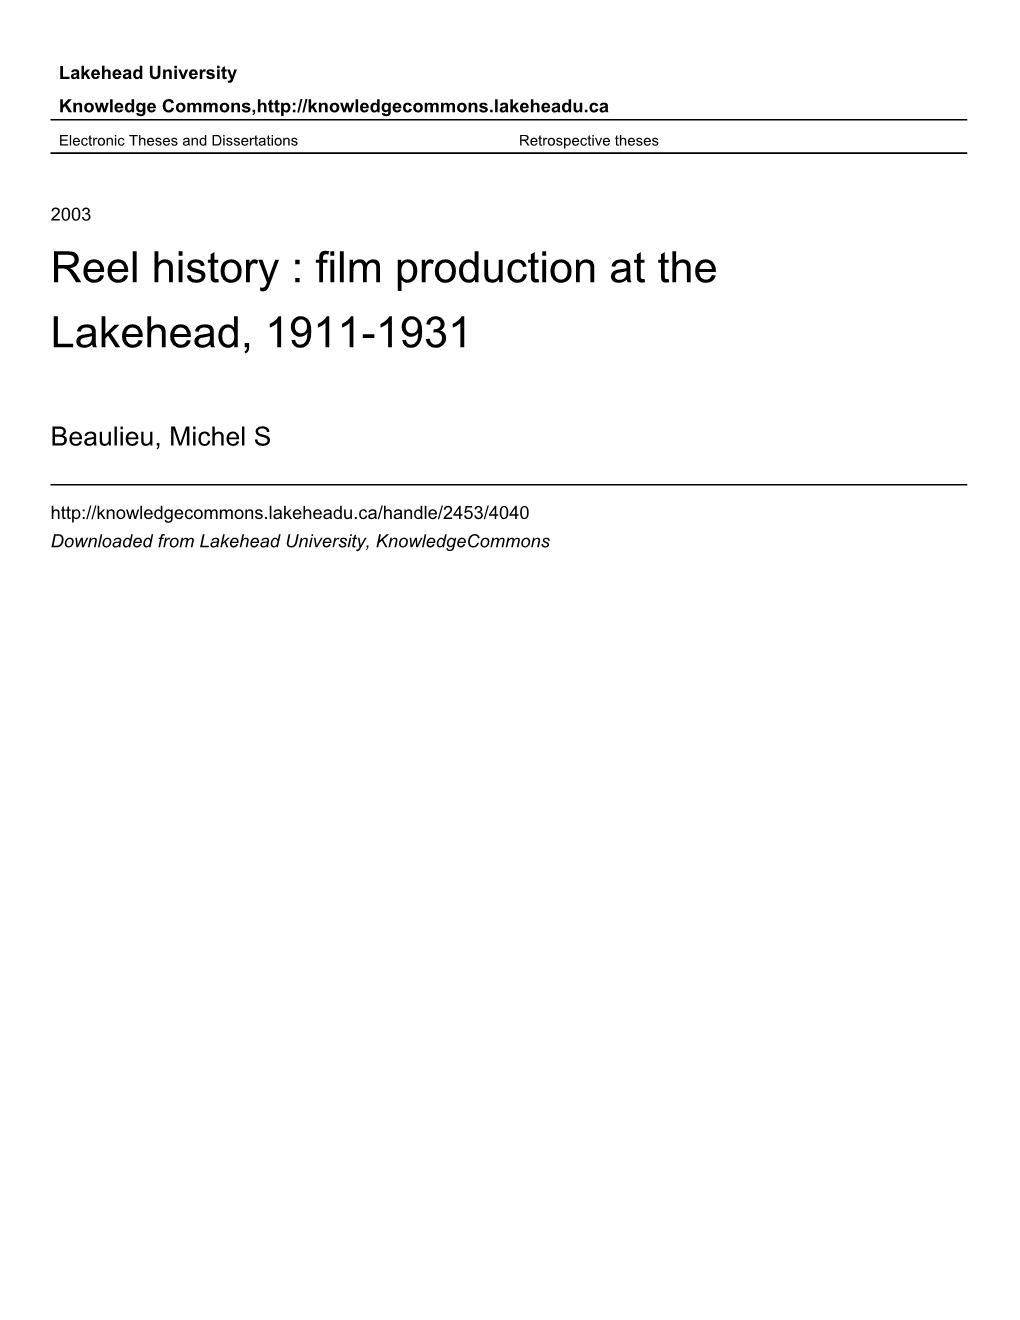 Reel History : Film Production at the Lakehead, 1911-1931